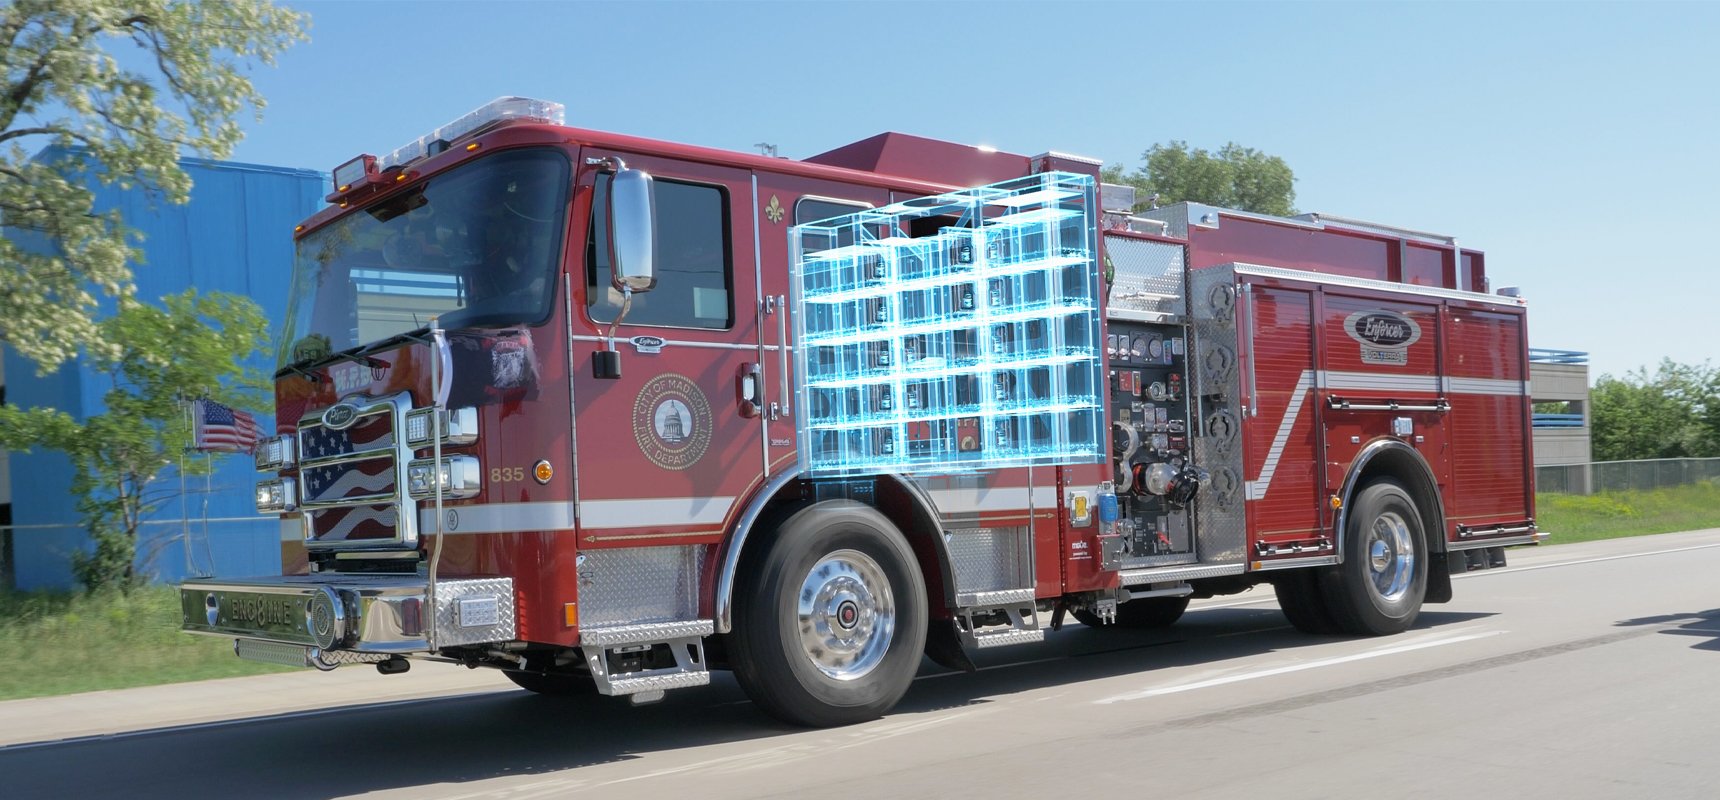 electric-fire-truck-parallel-electric-drive-train